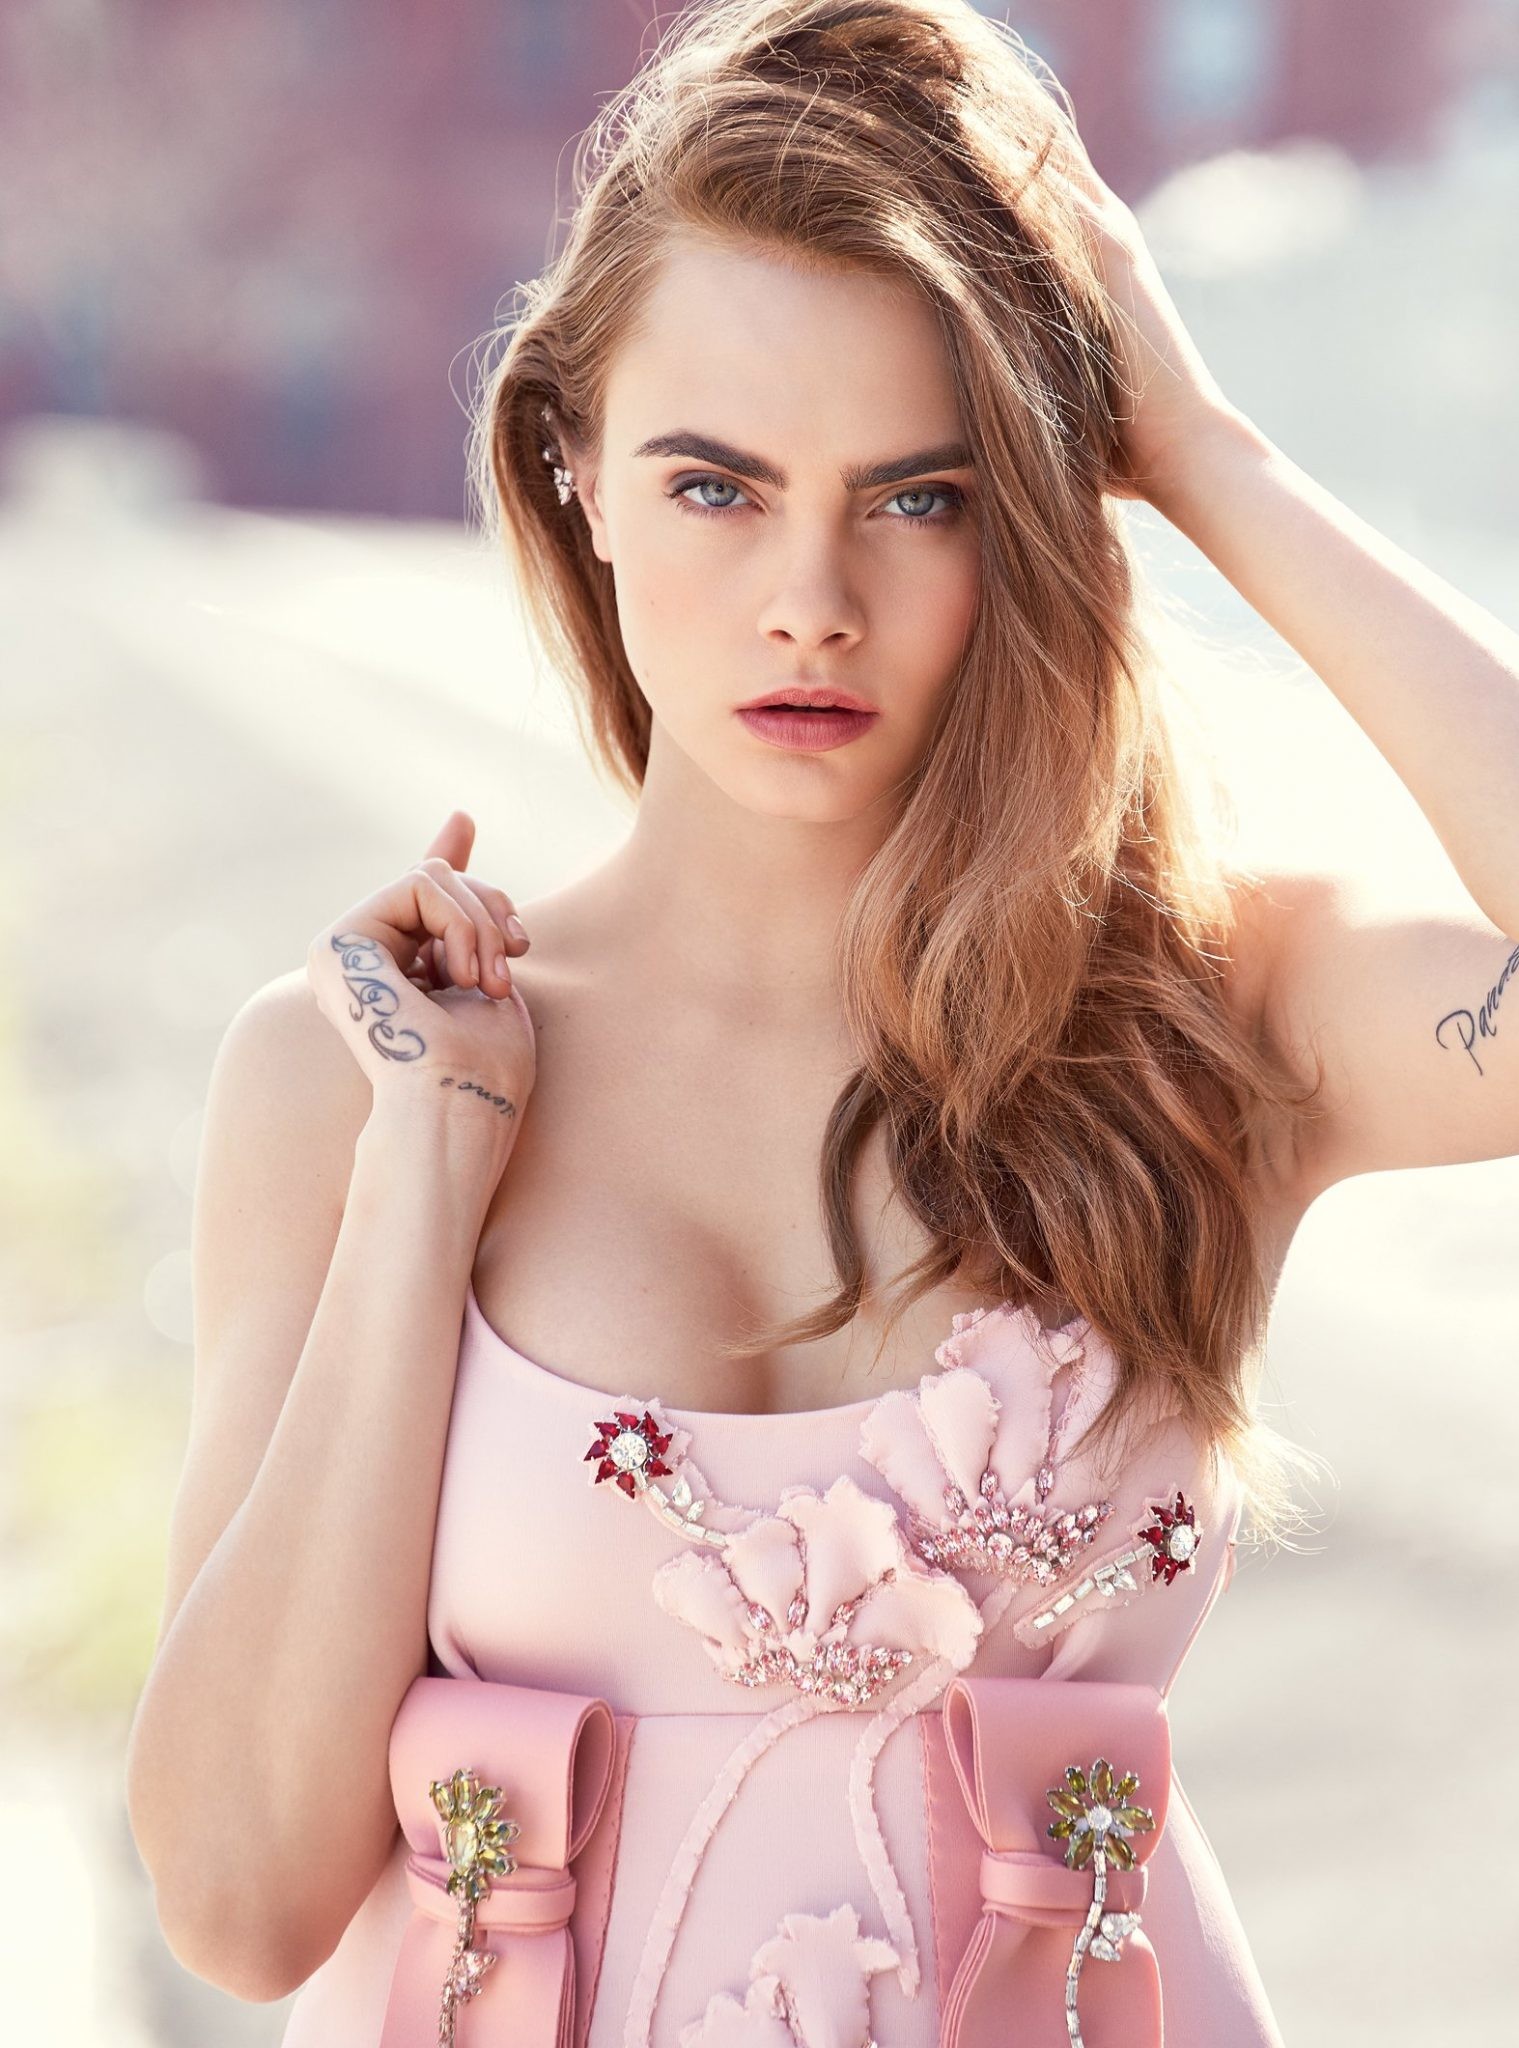 1519x2048 Stunning Pictures of Cara Delevingne that will set your hearts racing